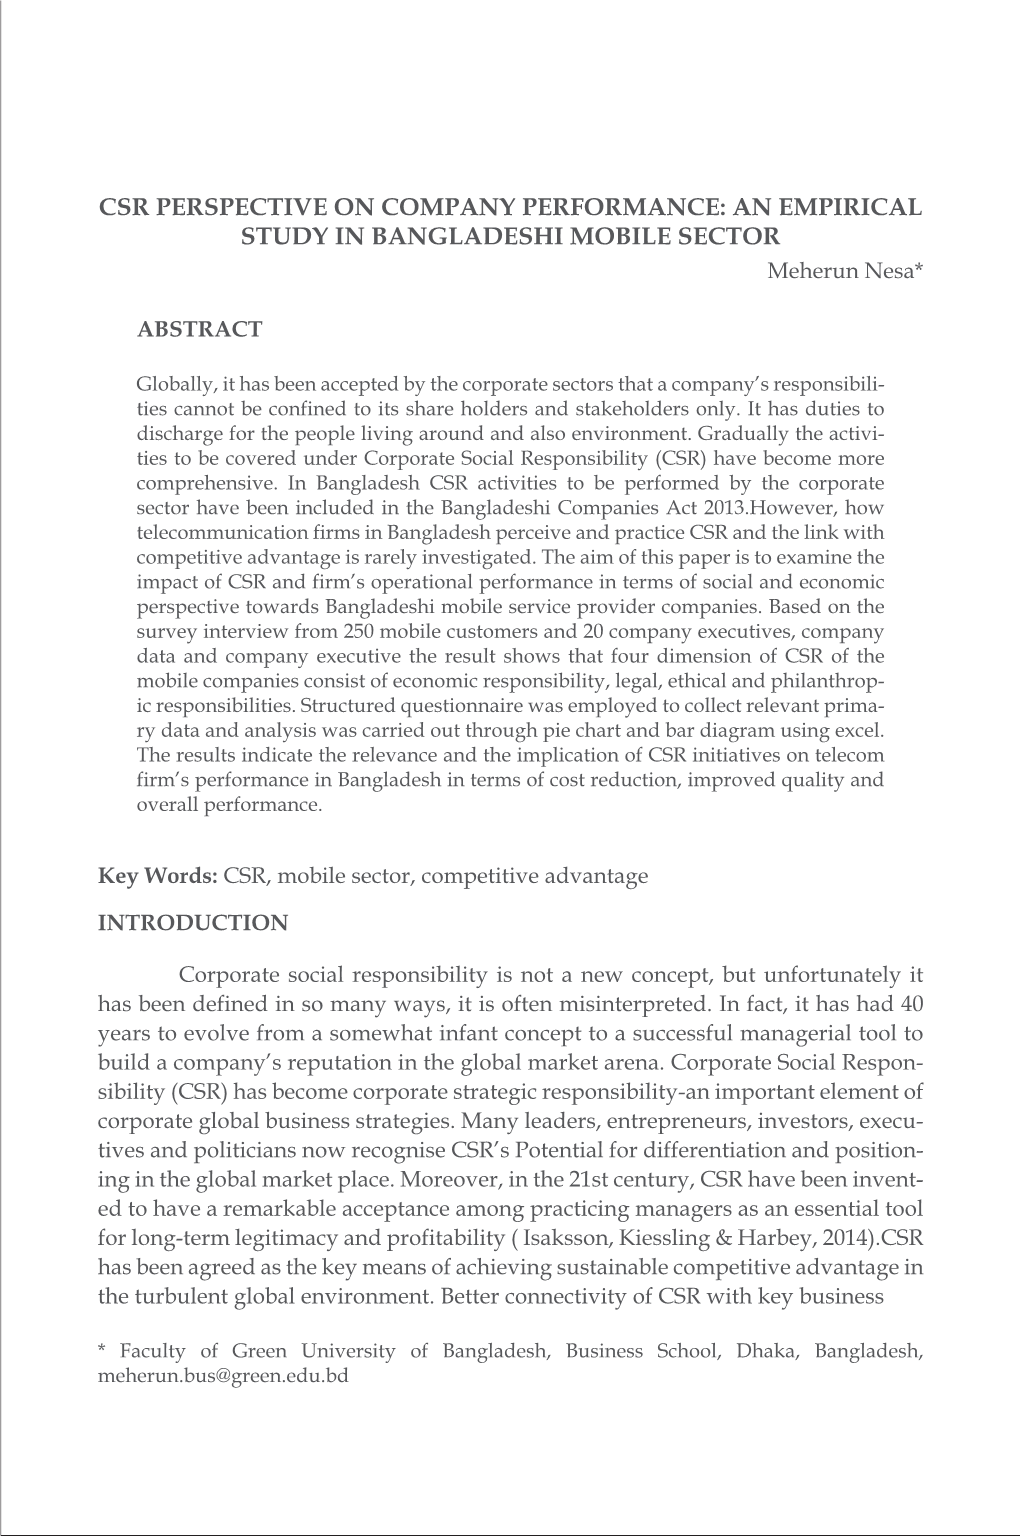 CSR Perspective on Company Performance an Empirical Study in Bangladeshi Mobile Sector